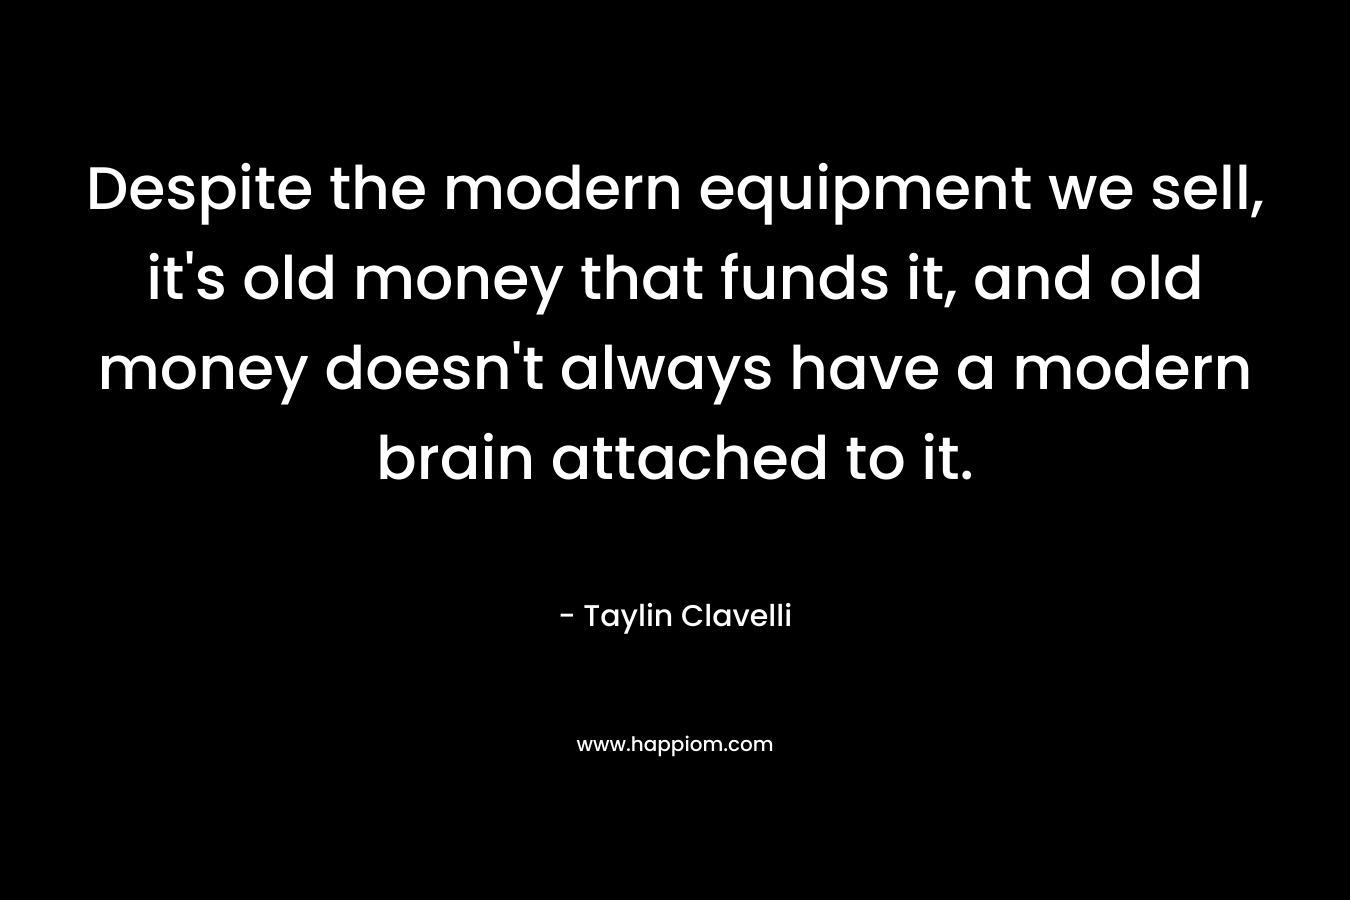 Despite the modern equipment we sell, it's old money that funds it, and old money doesn't always have a modern brain attached to it.